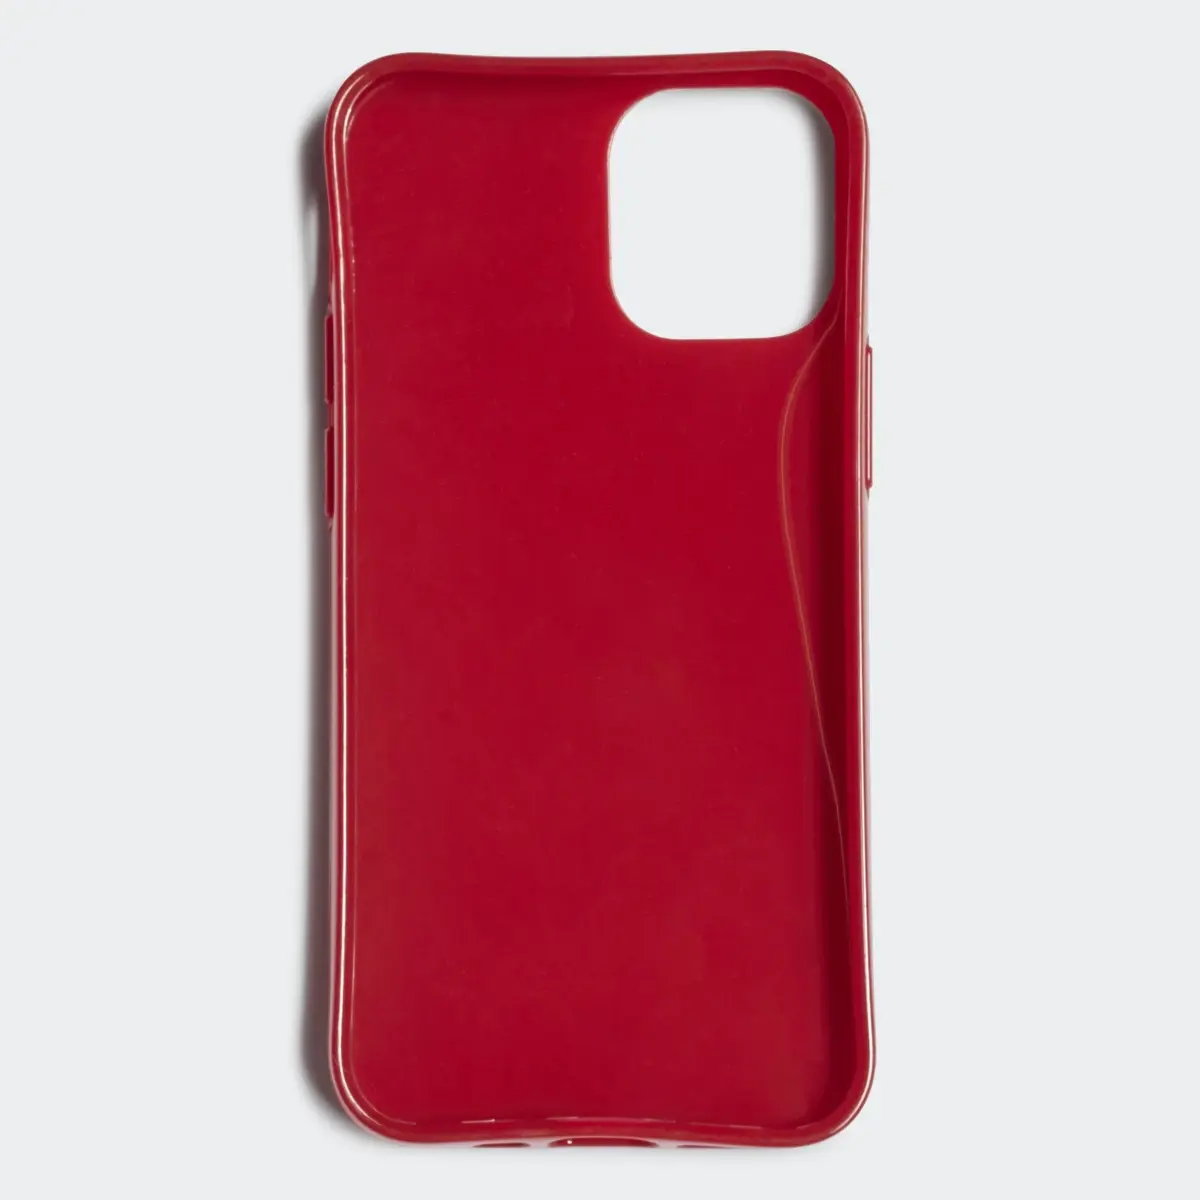 Adidas Moulded Snap for iPhone 12 mini. 3